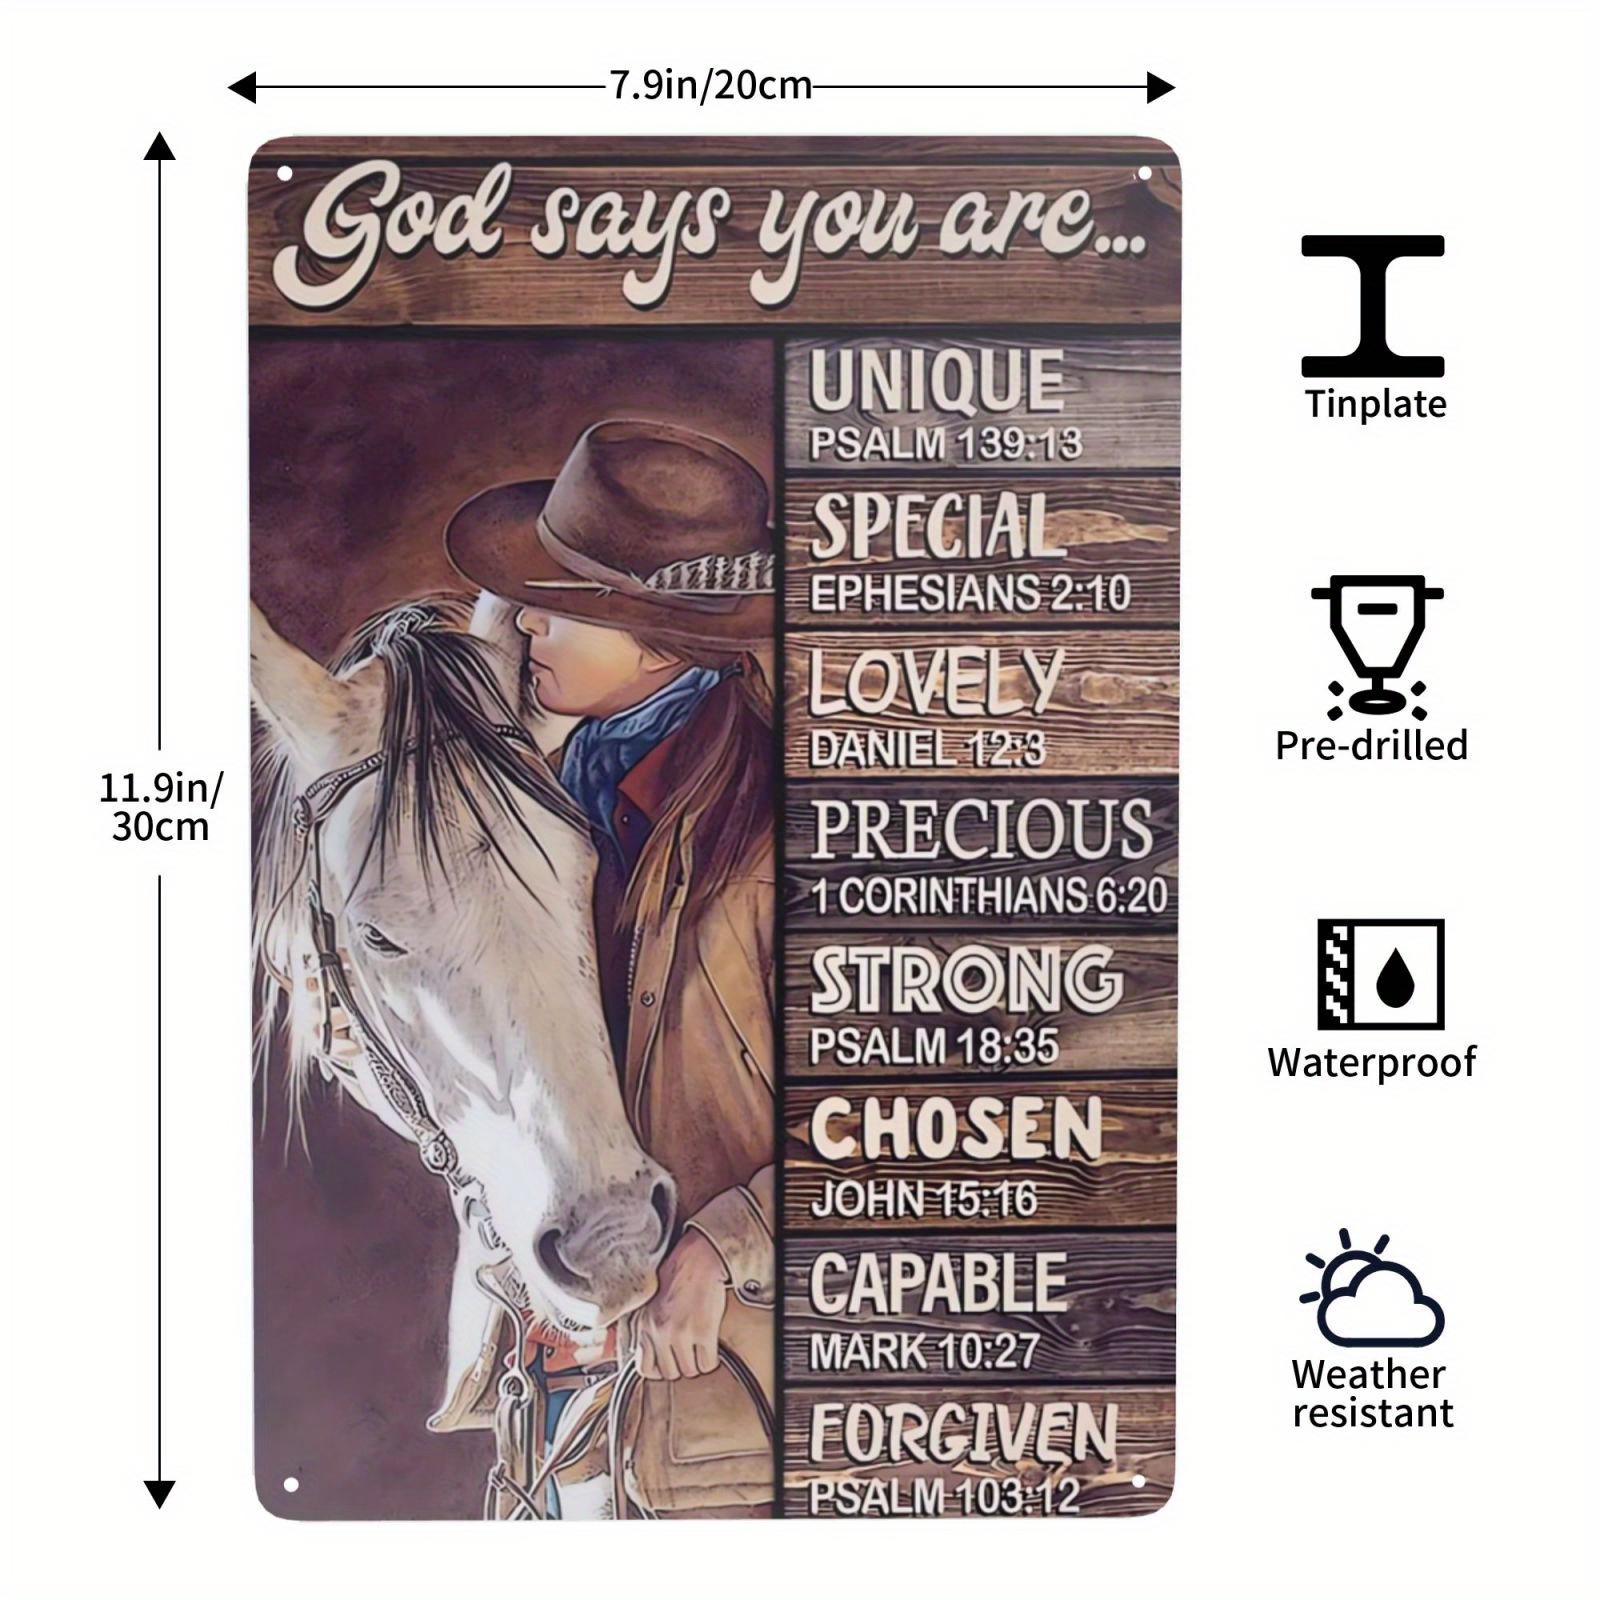 cowboy quotes about god